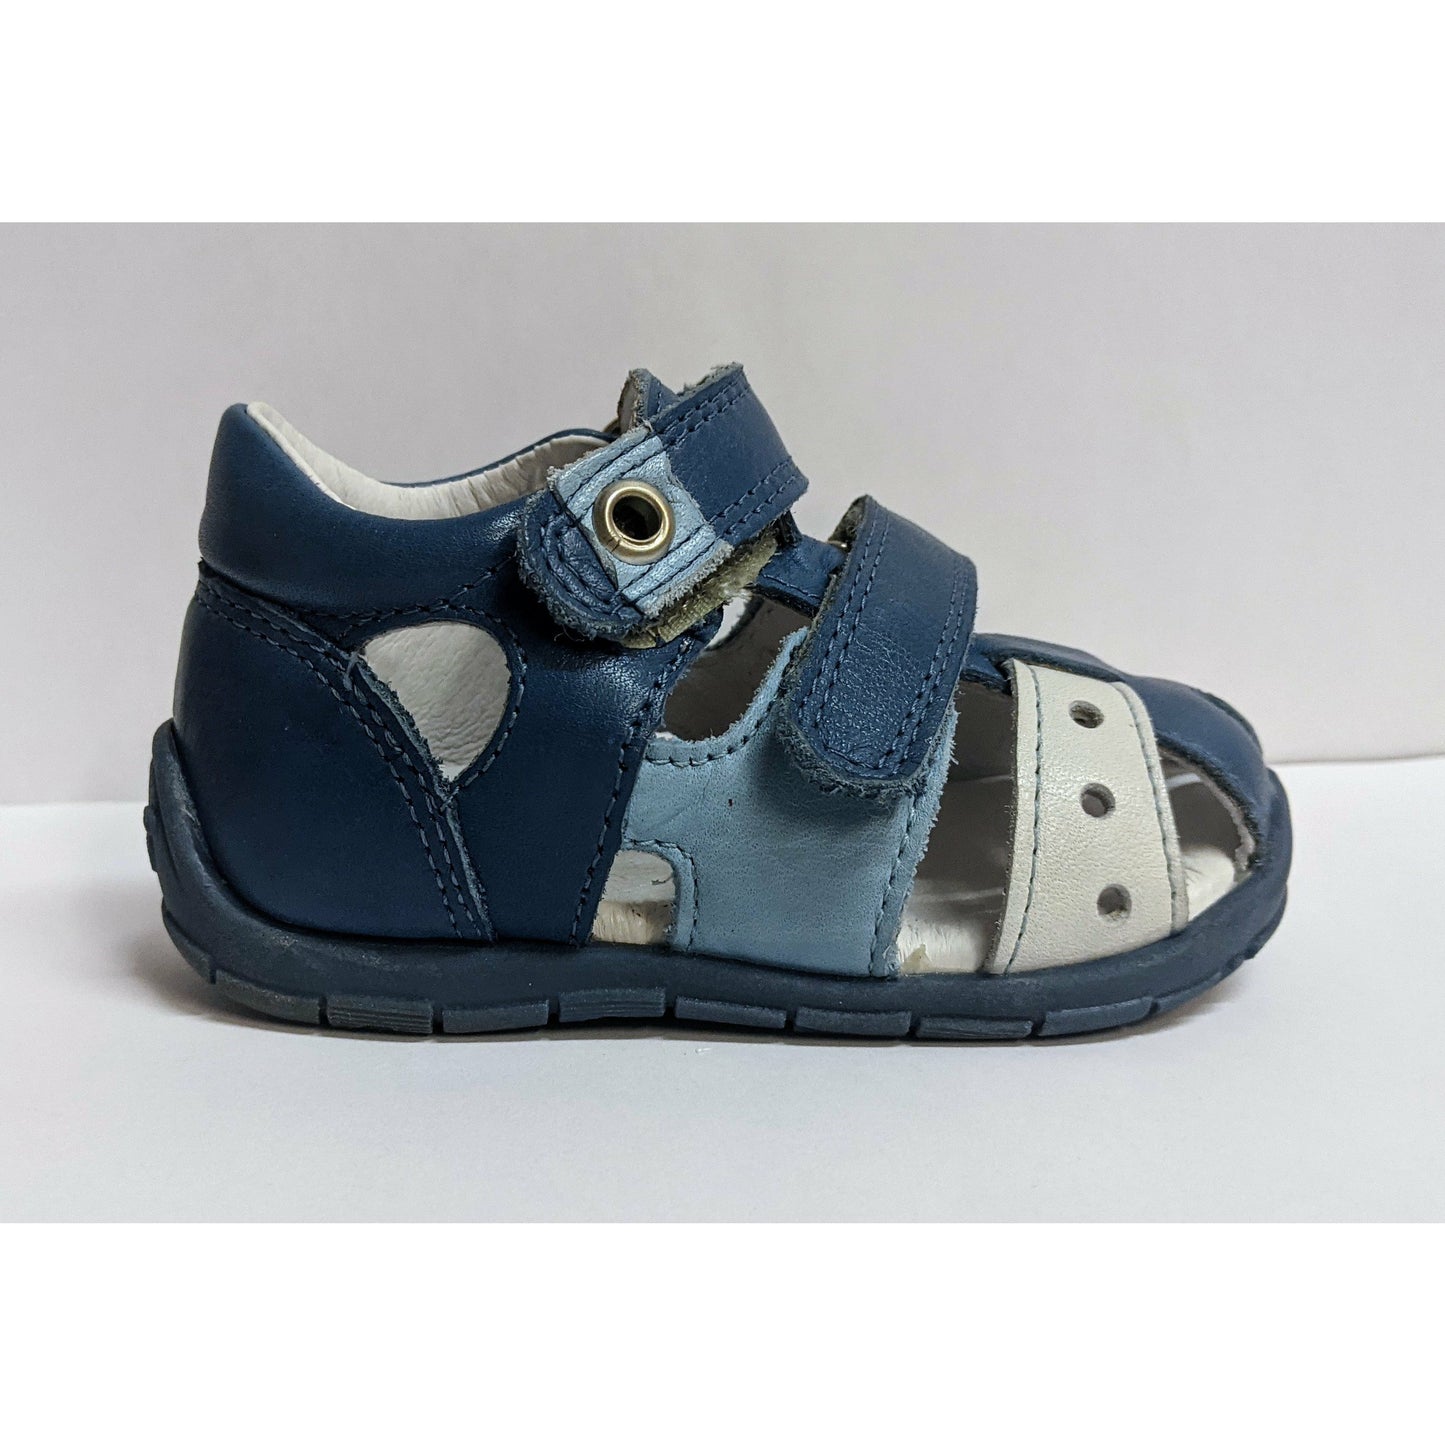 A boys sandal by Froddo, style G2150106, in blue and white leather with velcro fatening. Right side view.